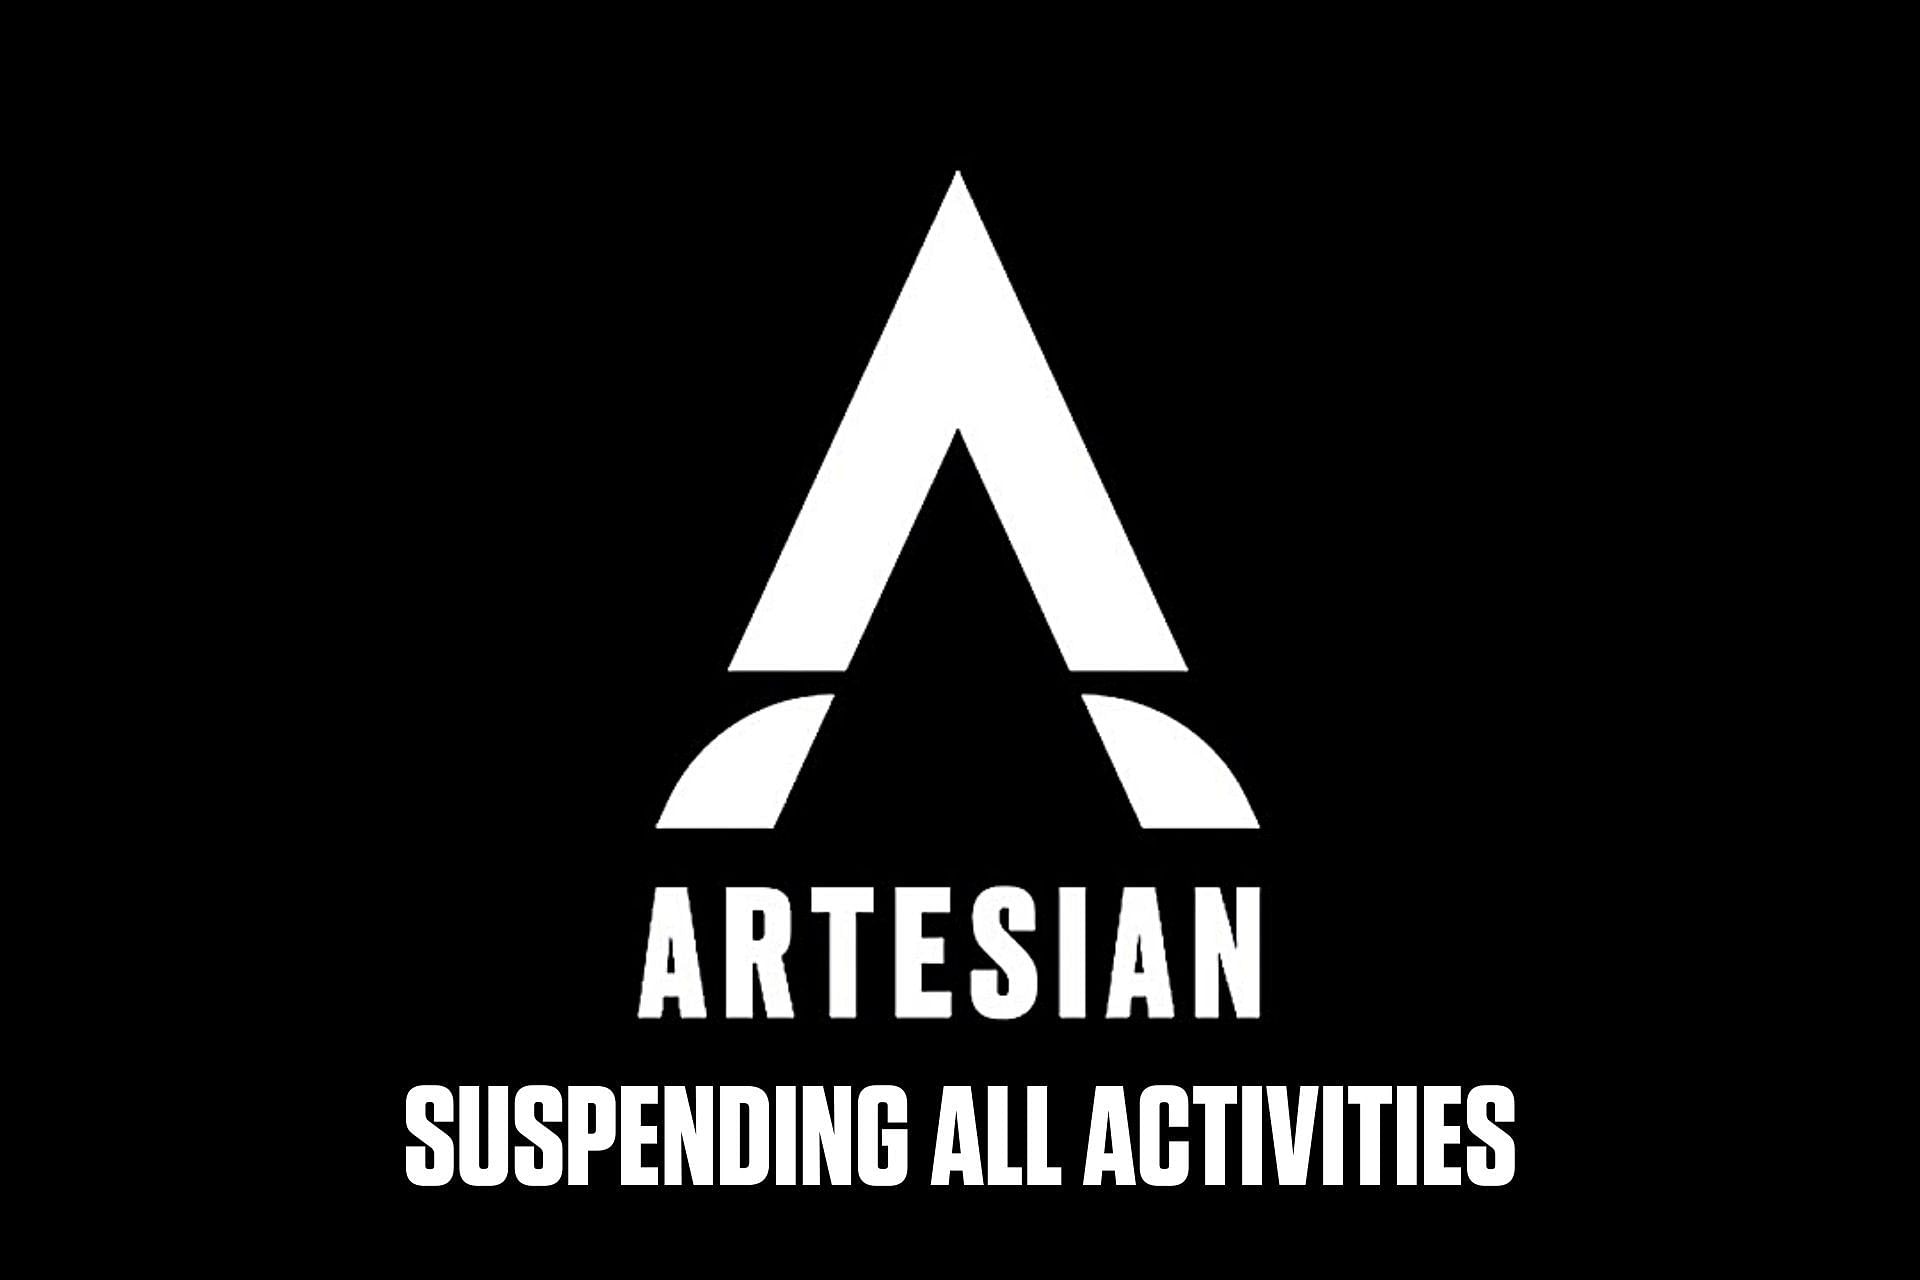 Artesian Builds will be seizing their activities, according to a new tweet (Images via Sportskeeda)